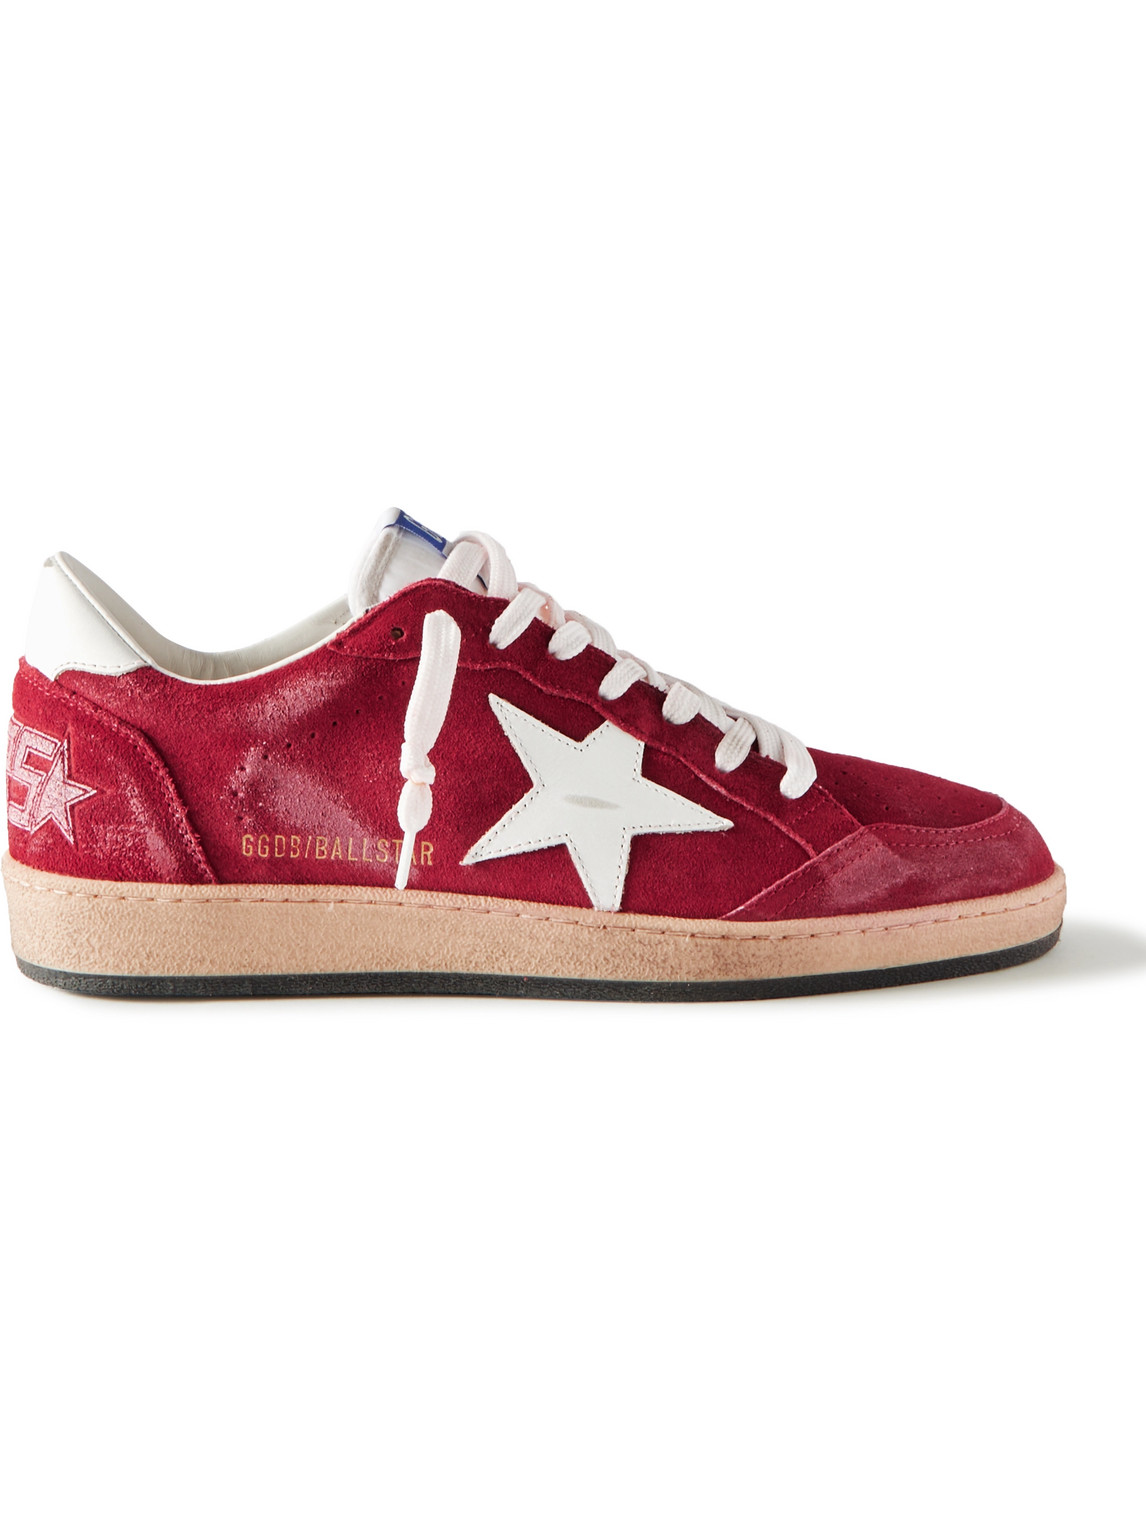 Ball Star Distressed Suede and Leather Sneakers